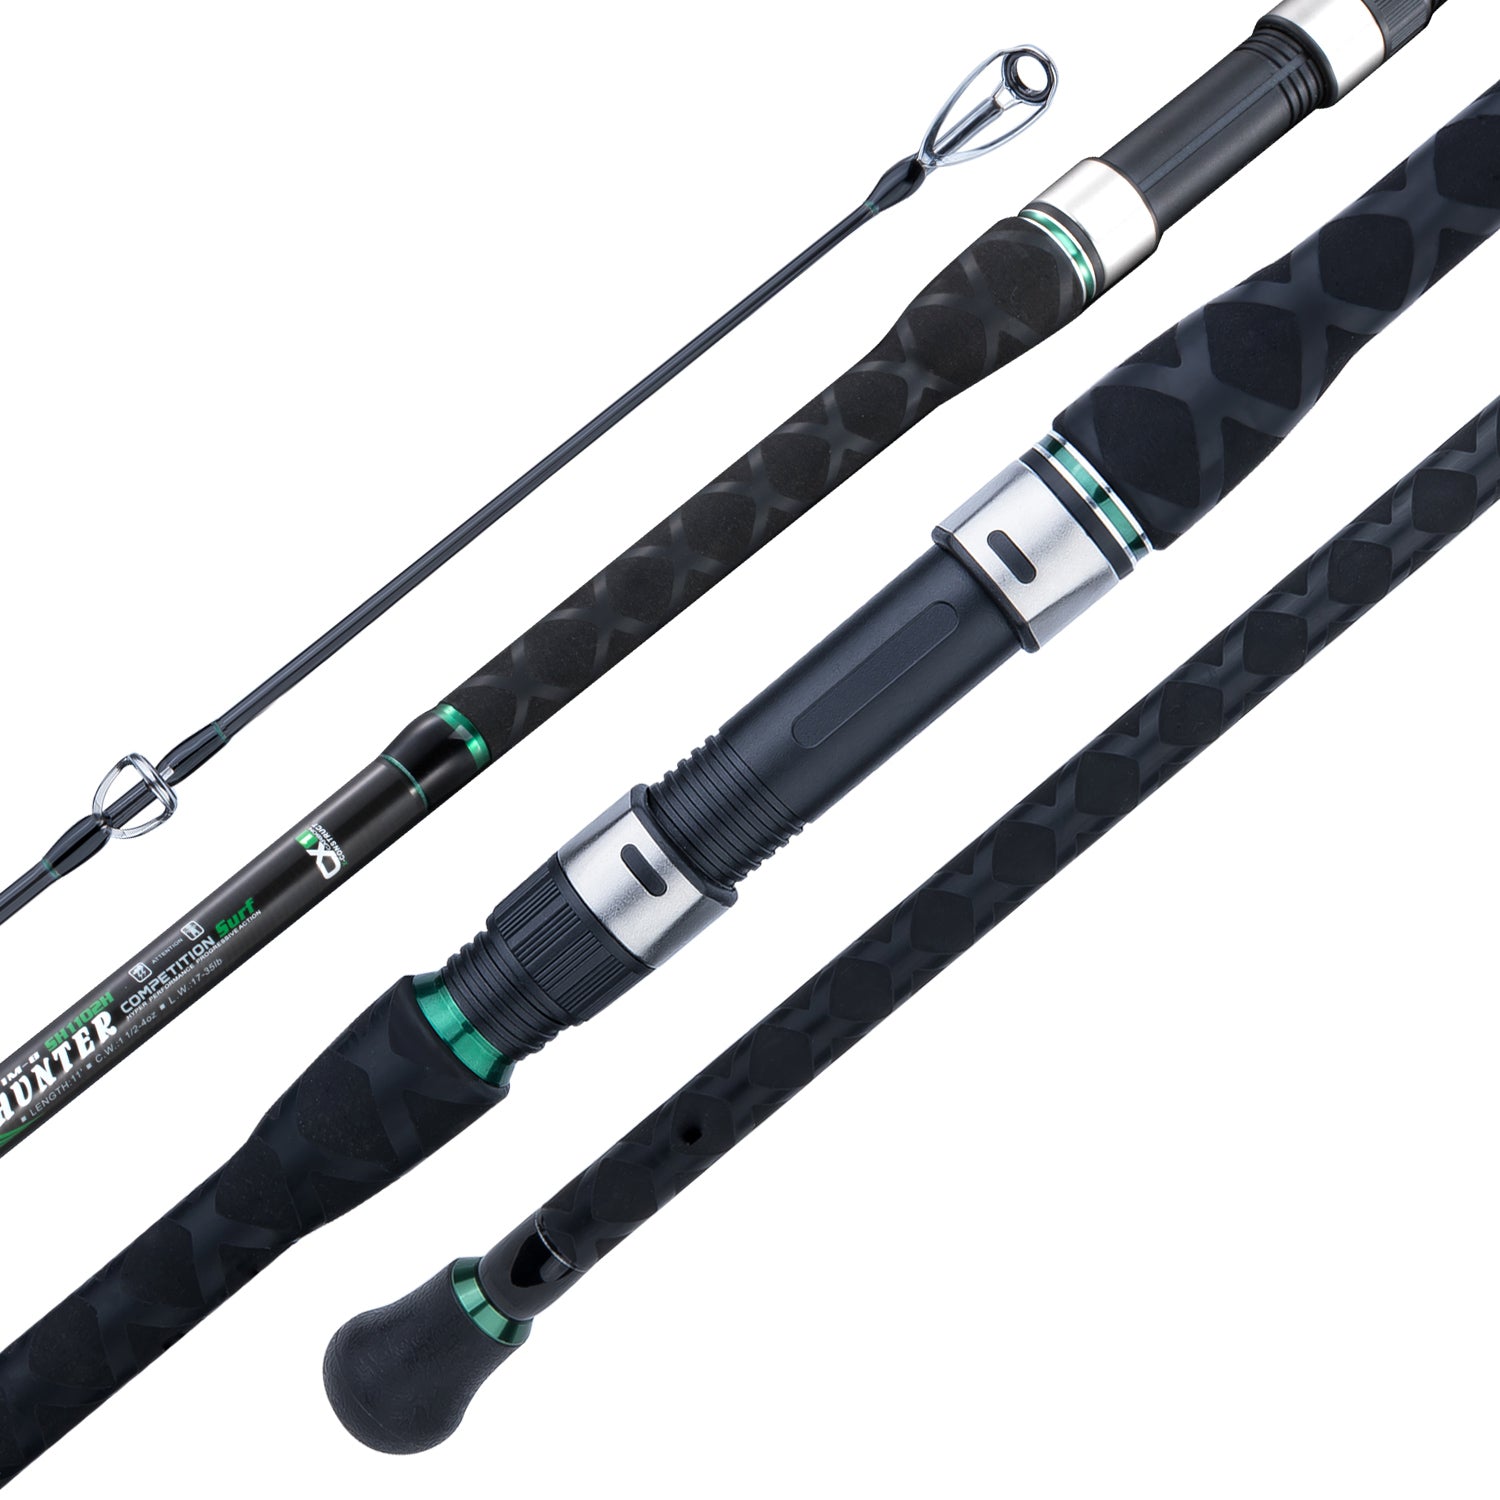 Fly Rods IM8 Carbon Fiber/Loaded Reel - sporting goods - by owner